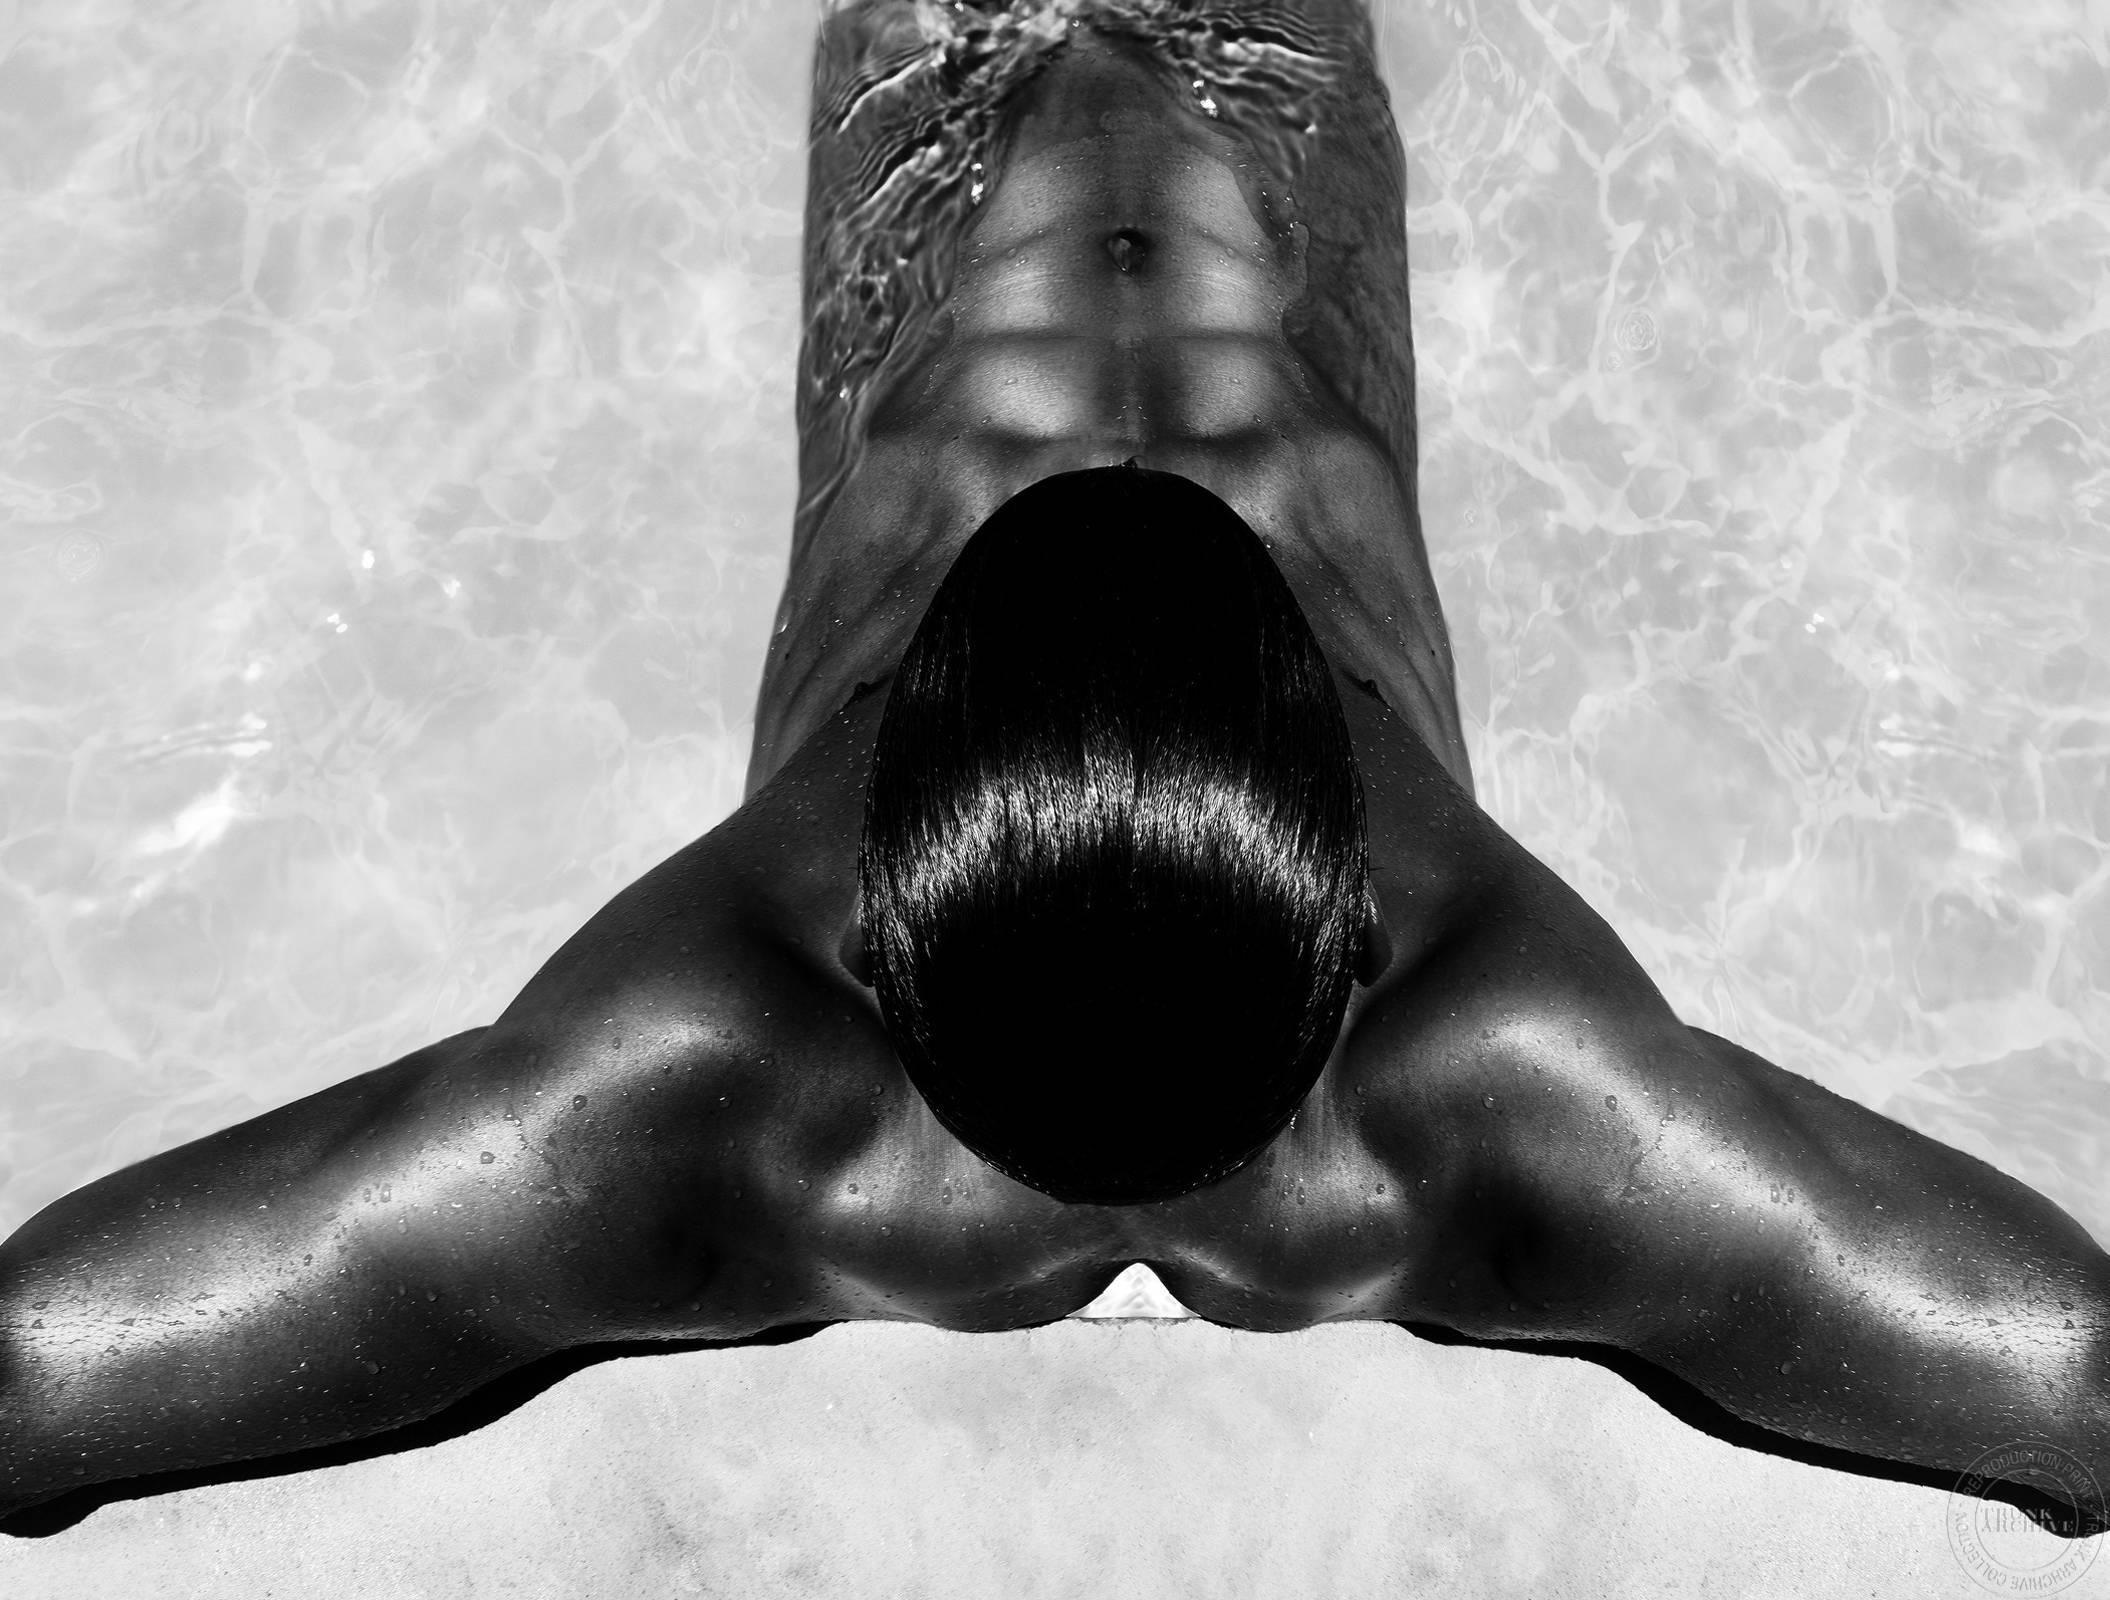 Marco Grob Black and White Photograph - Portrait (Man in Water)